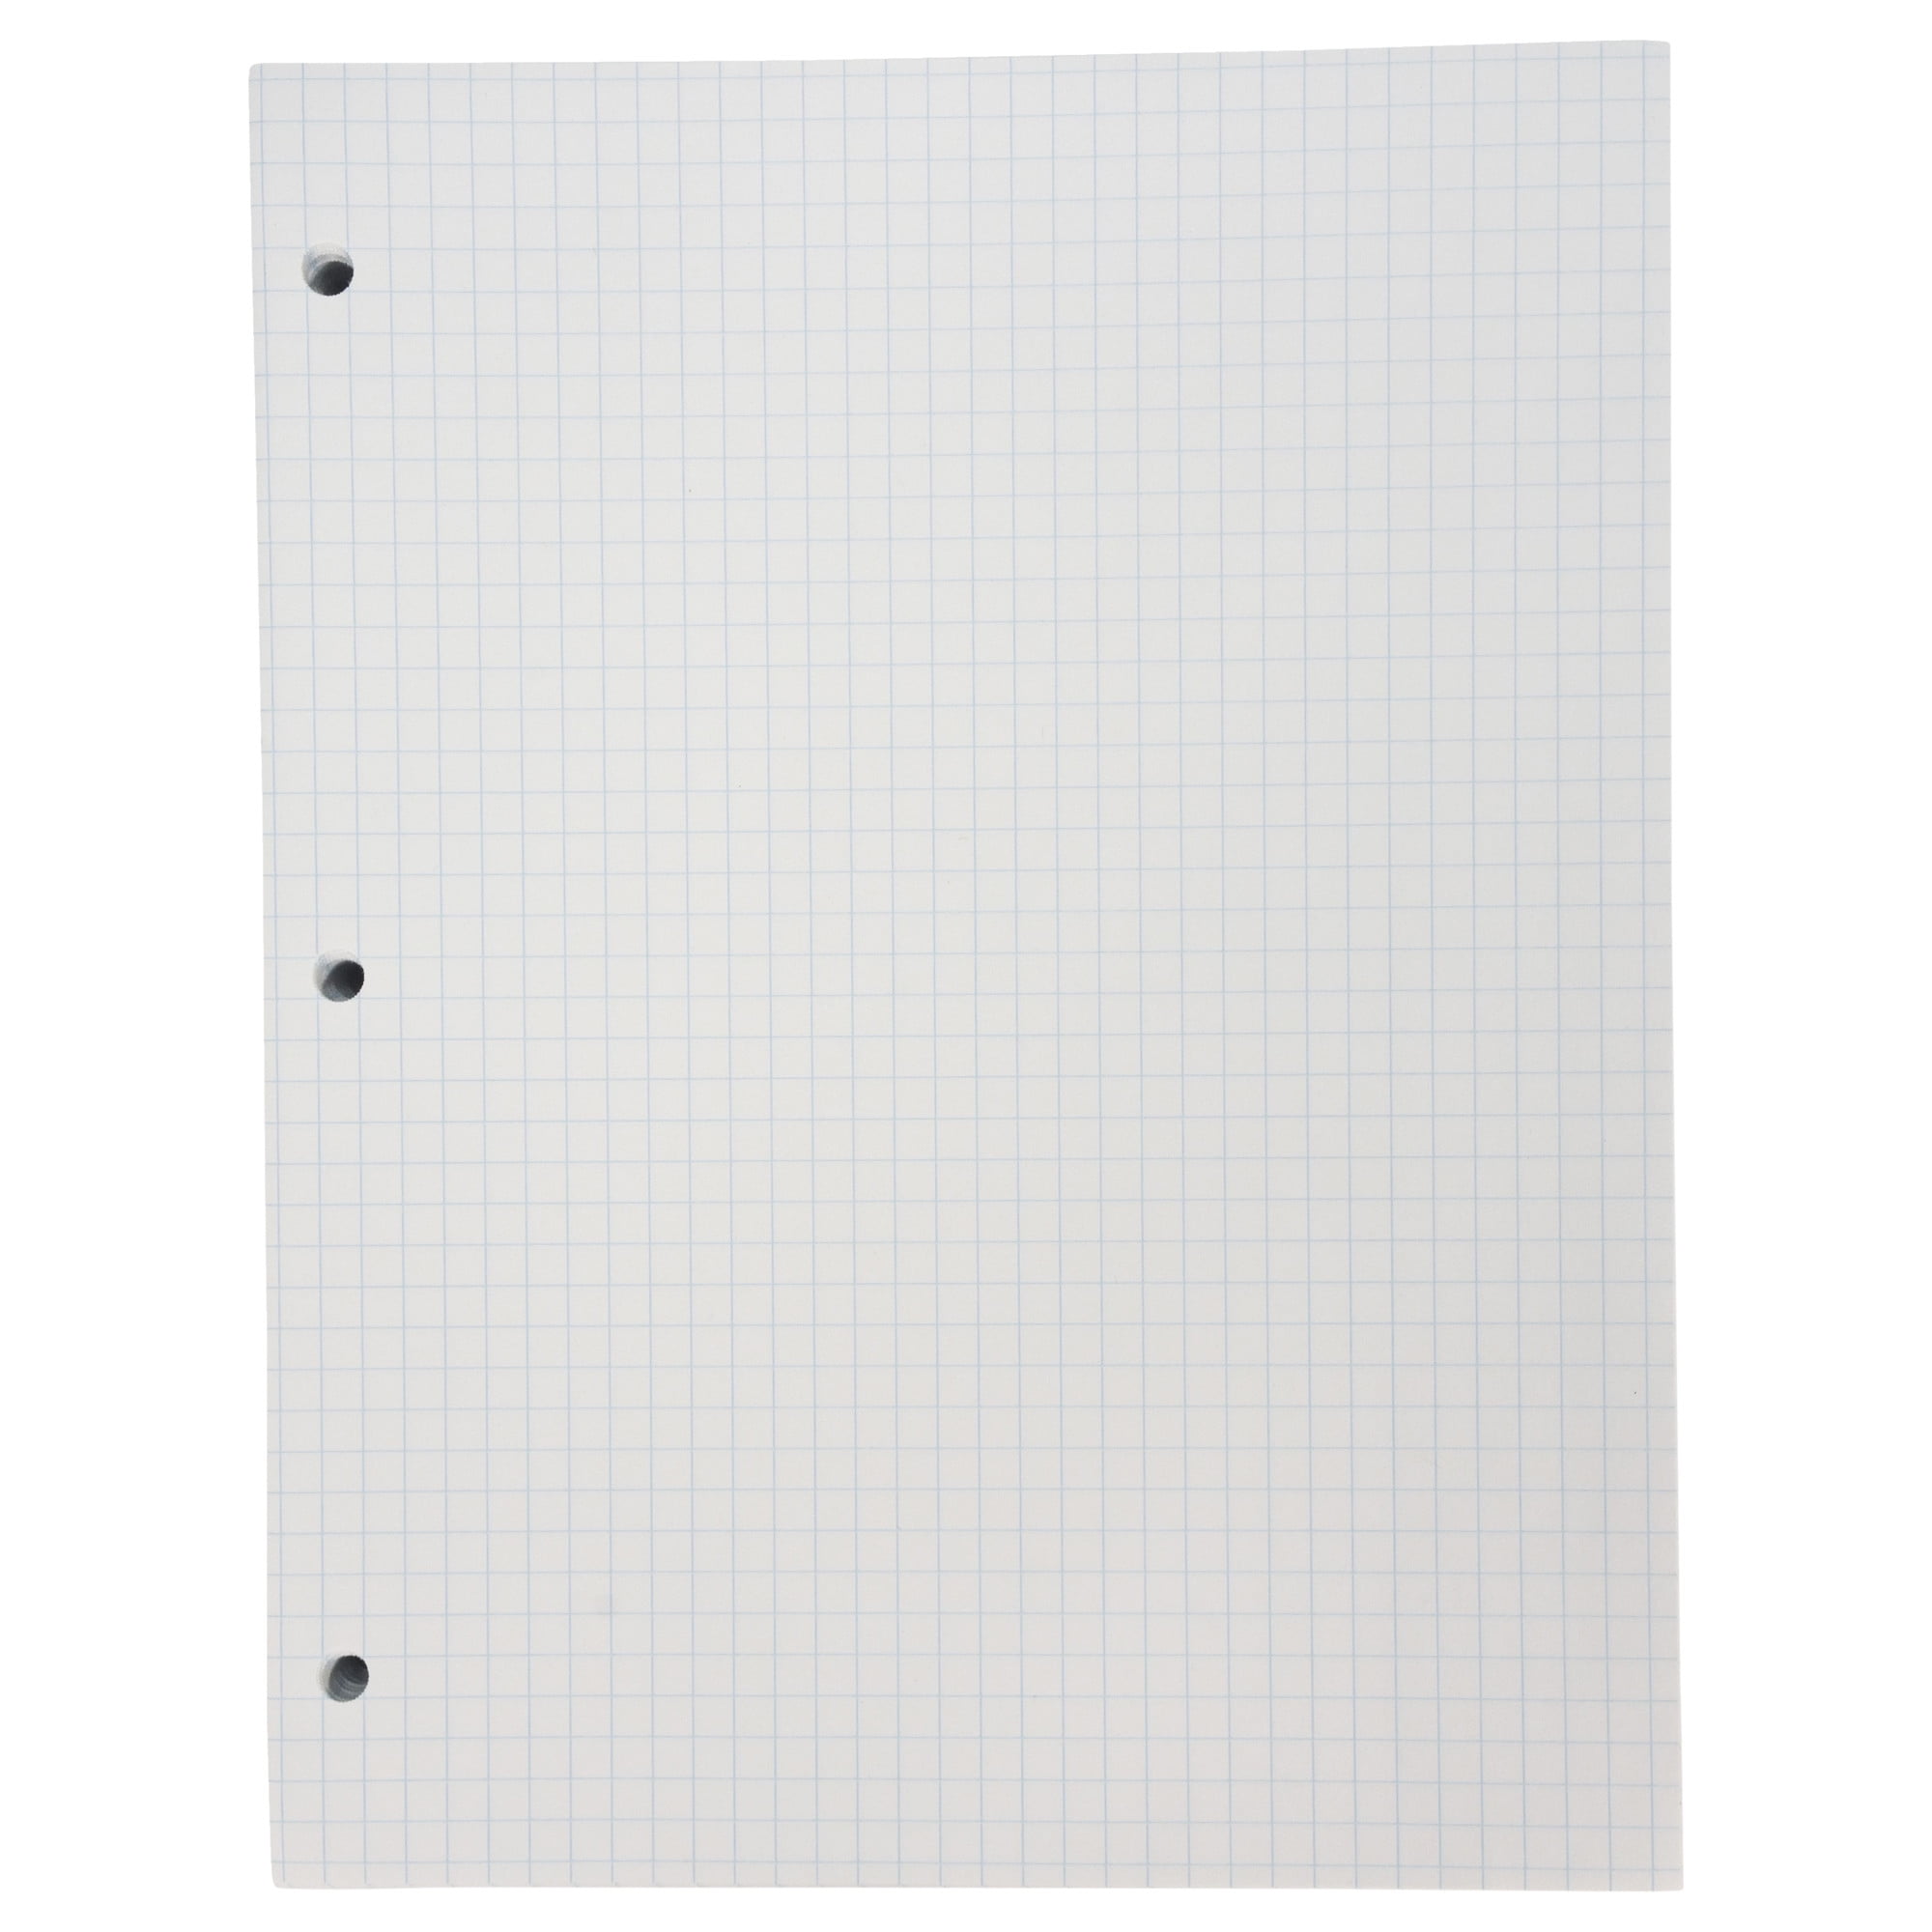 Braille Paper, Heavy 8.5 x 11 100 sheet pack 3 Hole Punch